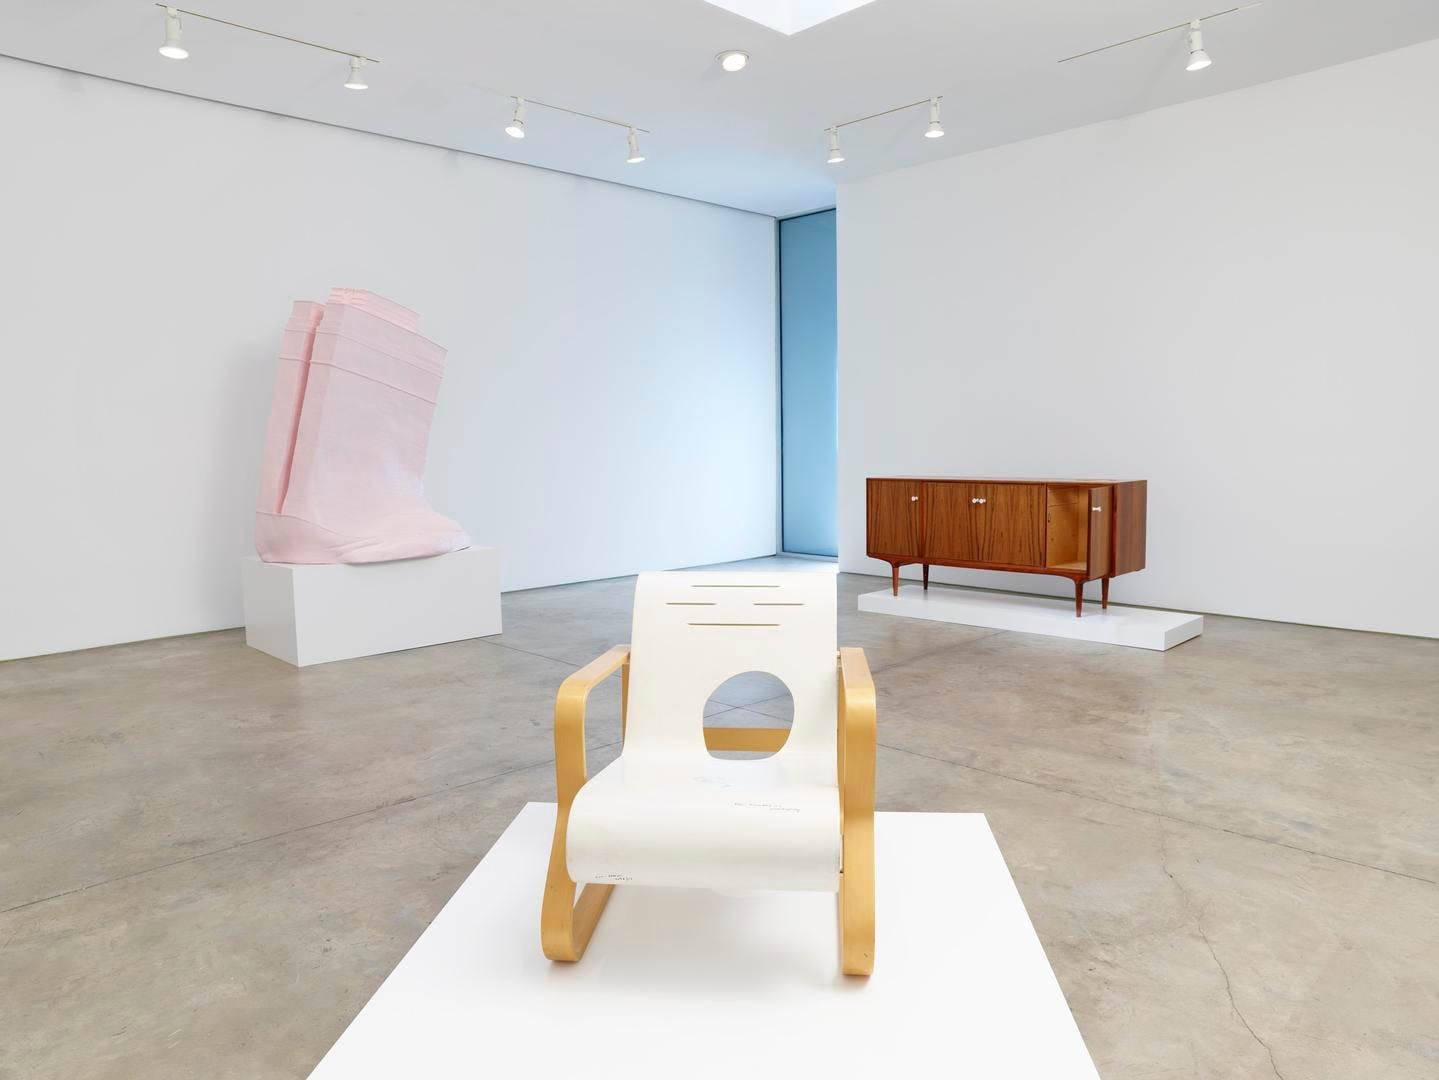 Erwin Wurm, Ethics demonstrated in geometrical order installation view 5